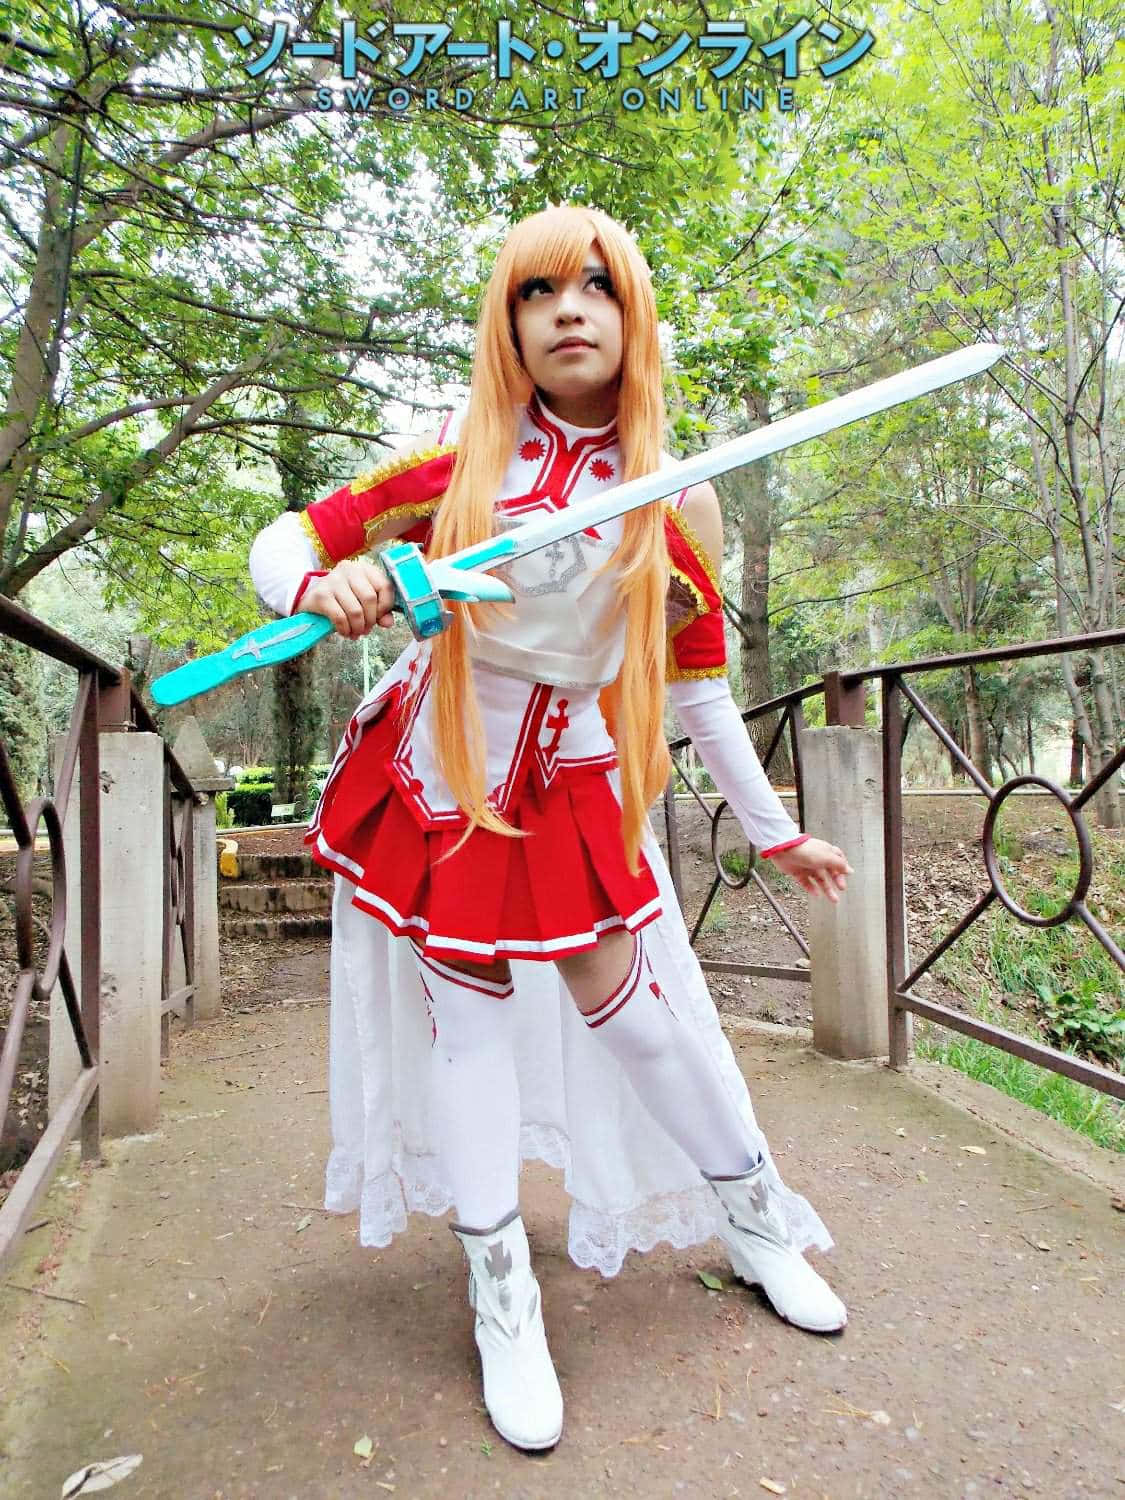 Passionate Fan Cosplaying As Sword Art Online Character Wallpaper